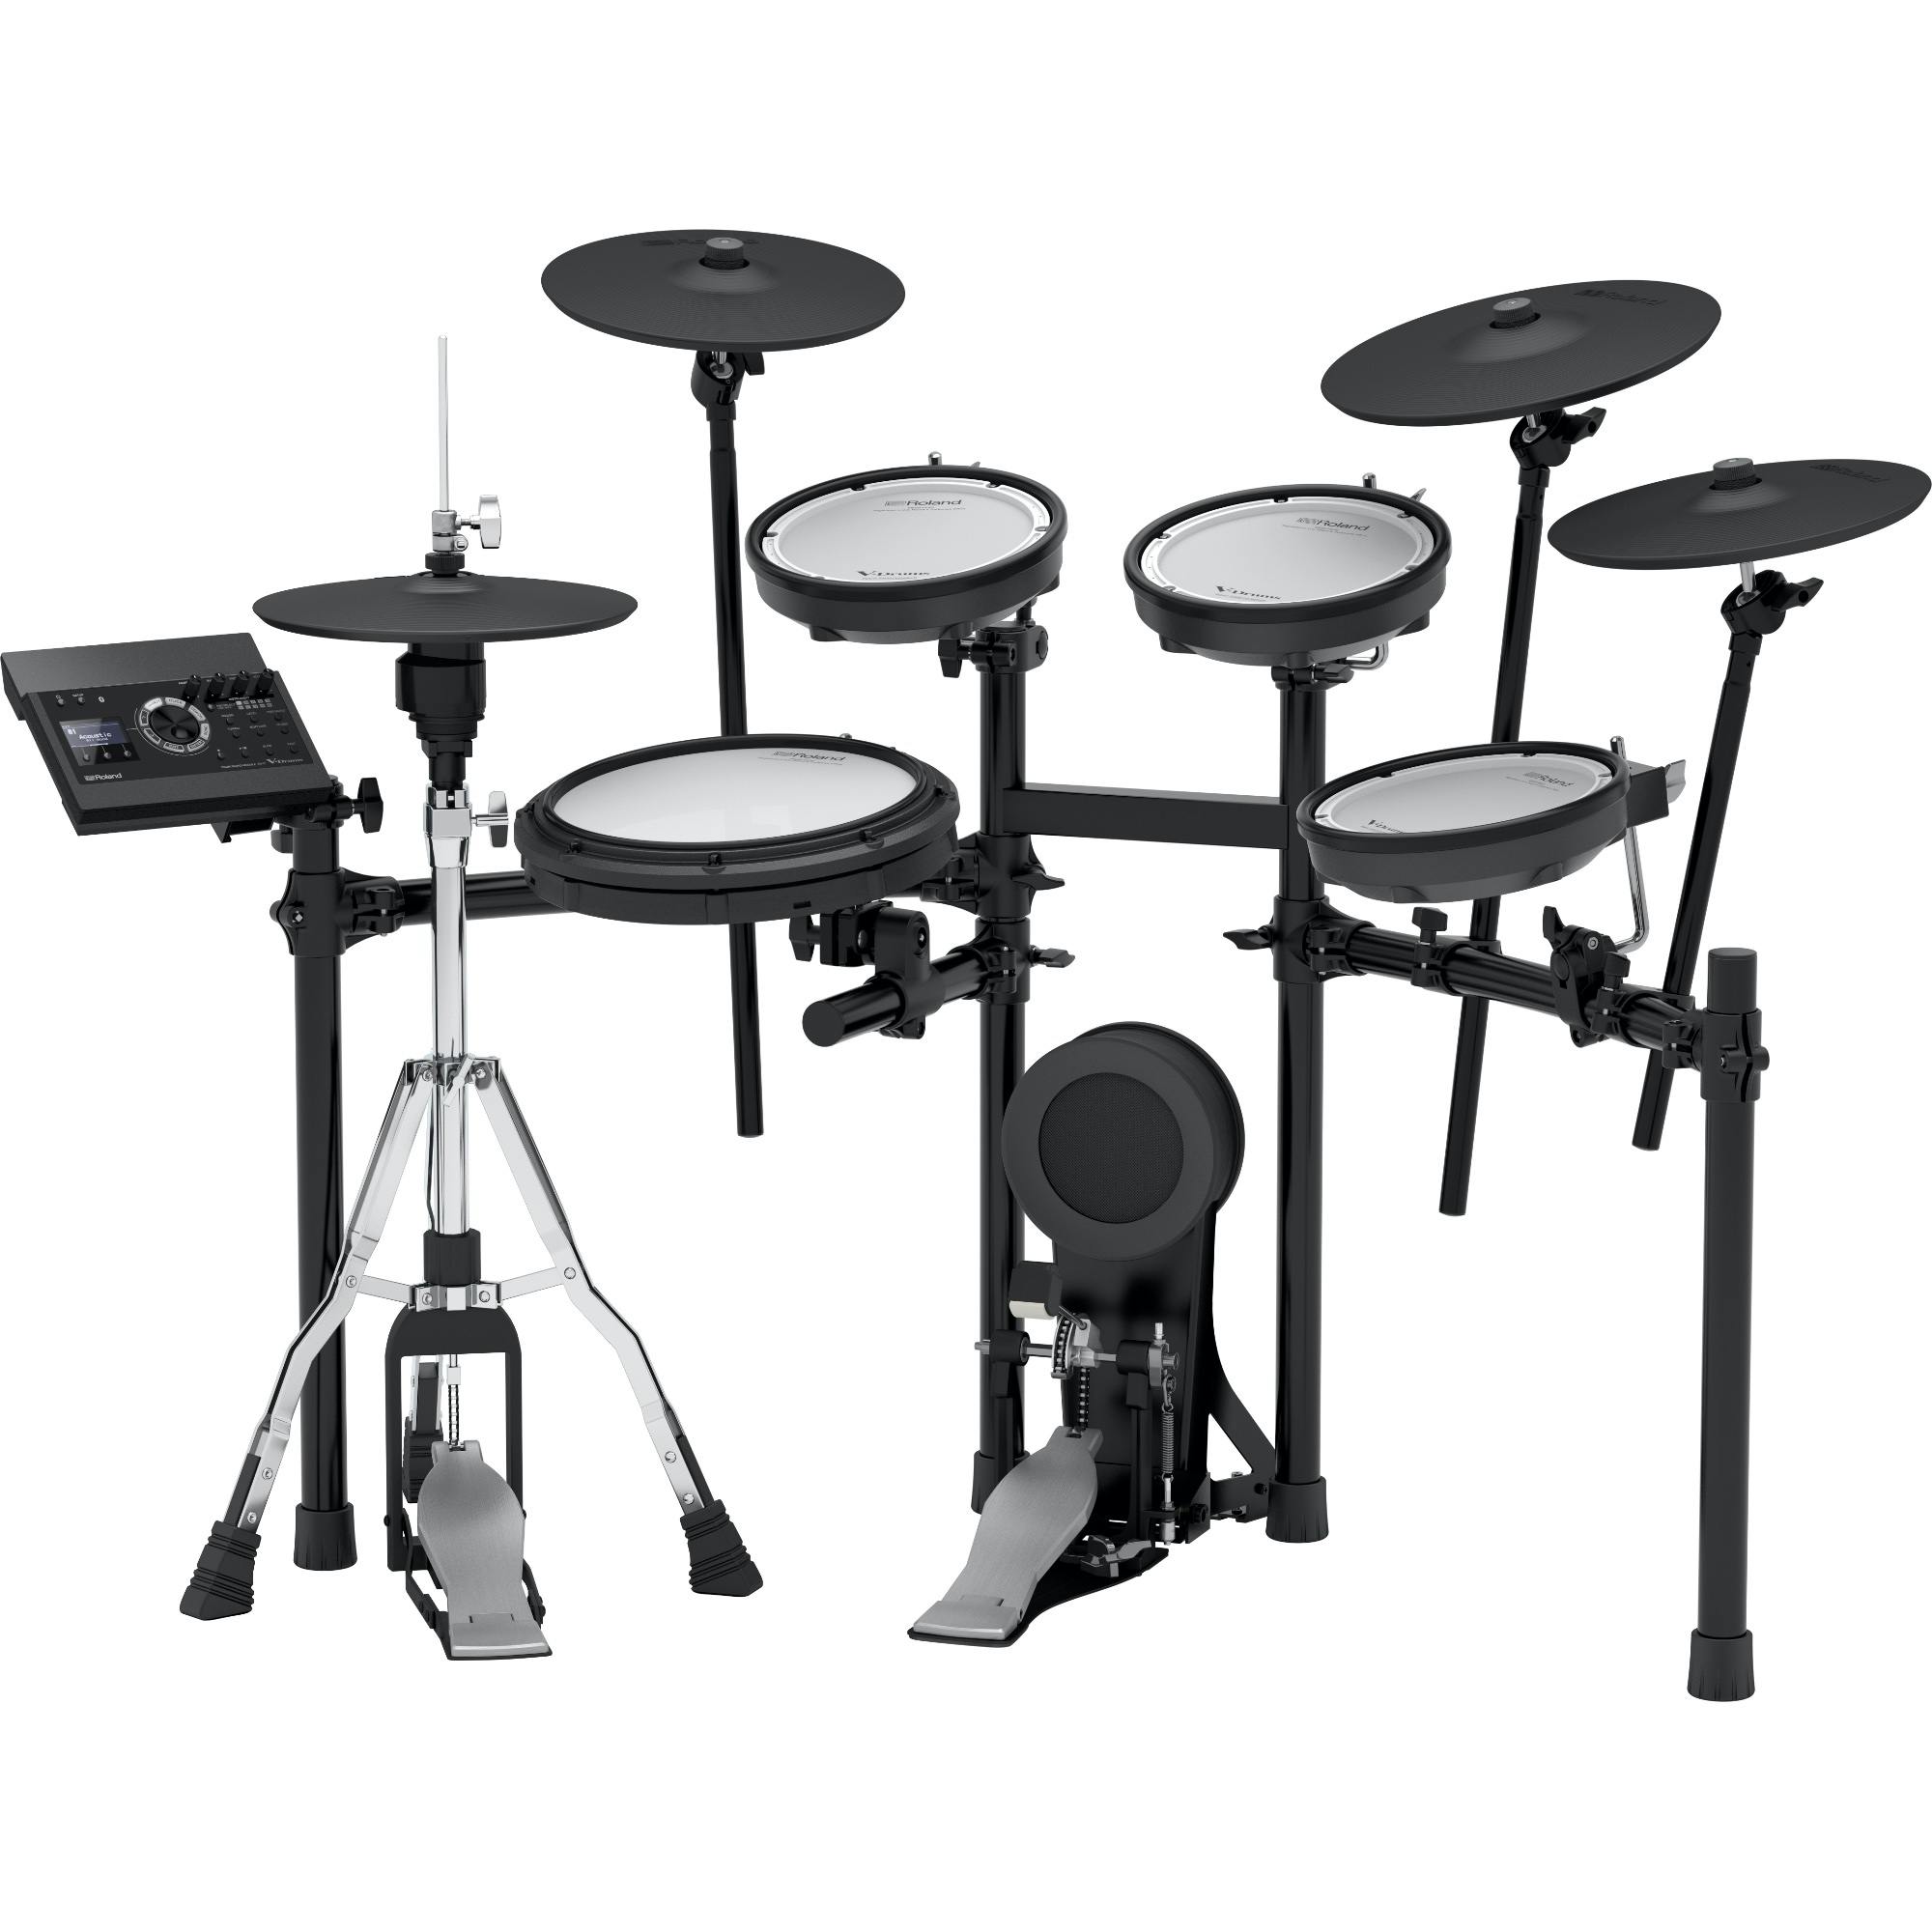 Roland TD-17 Electronic Drum Kits – Now Available! - Andertons 